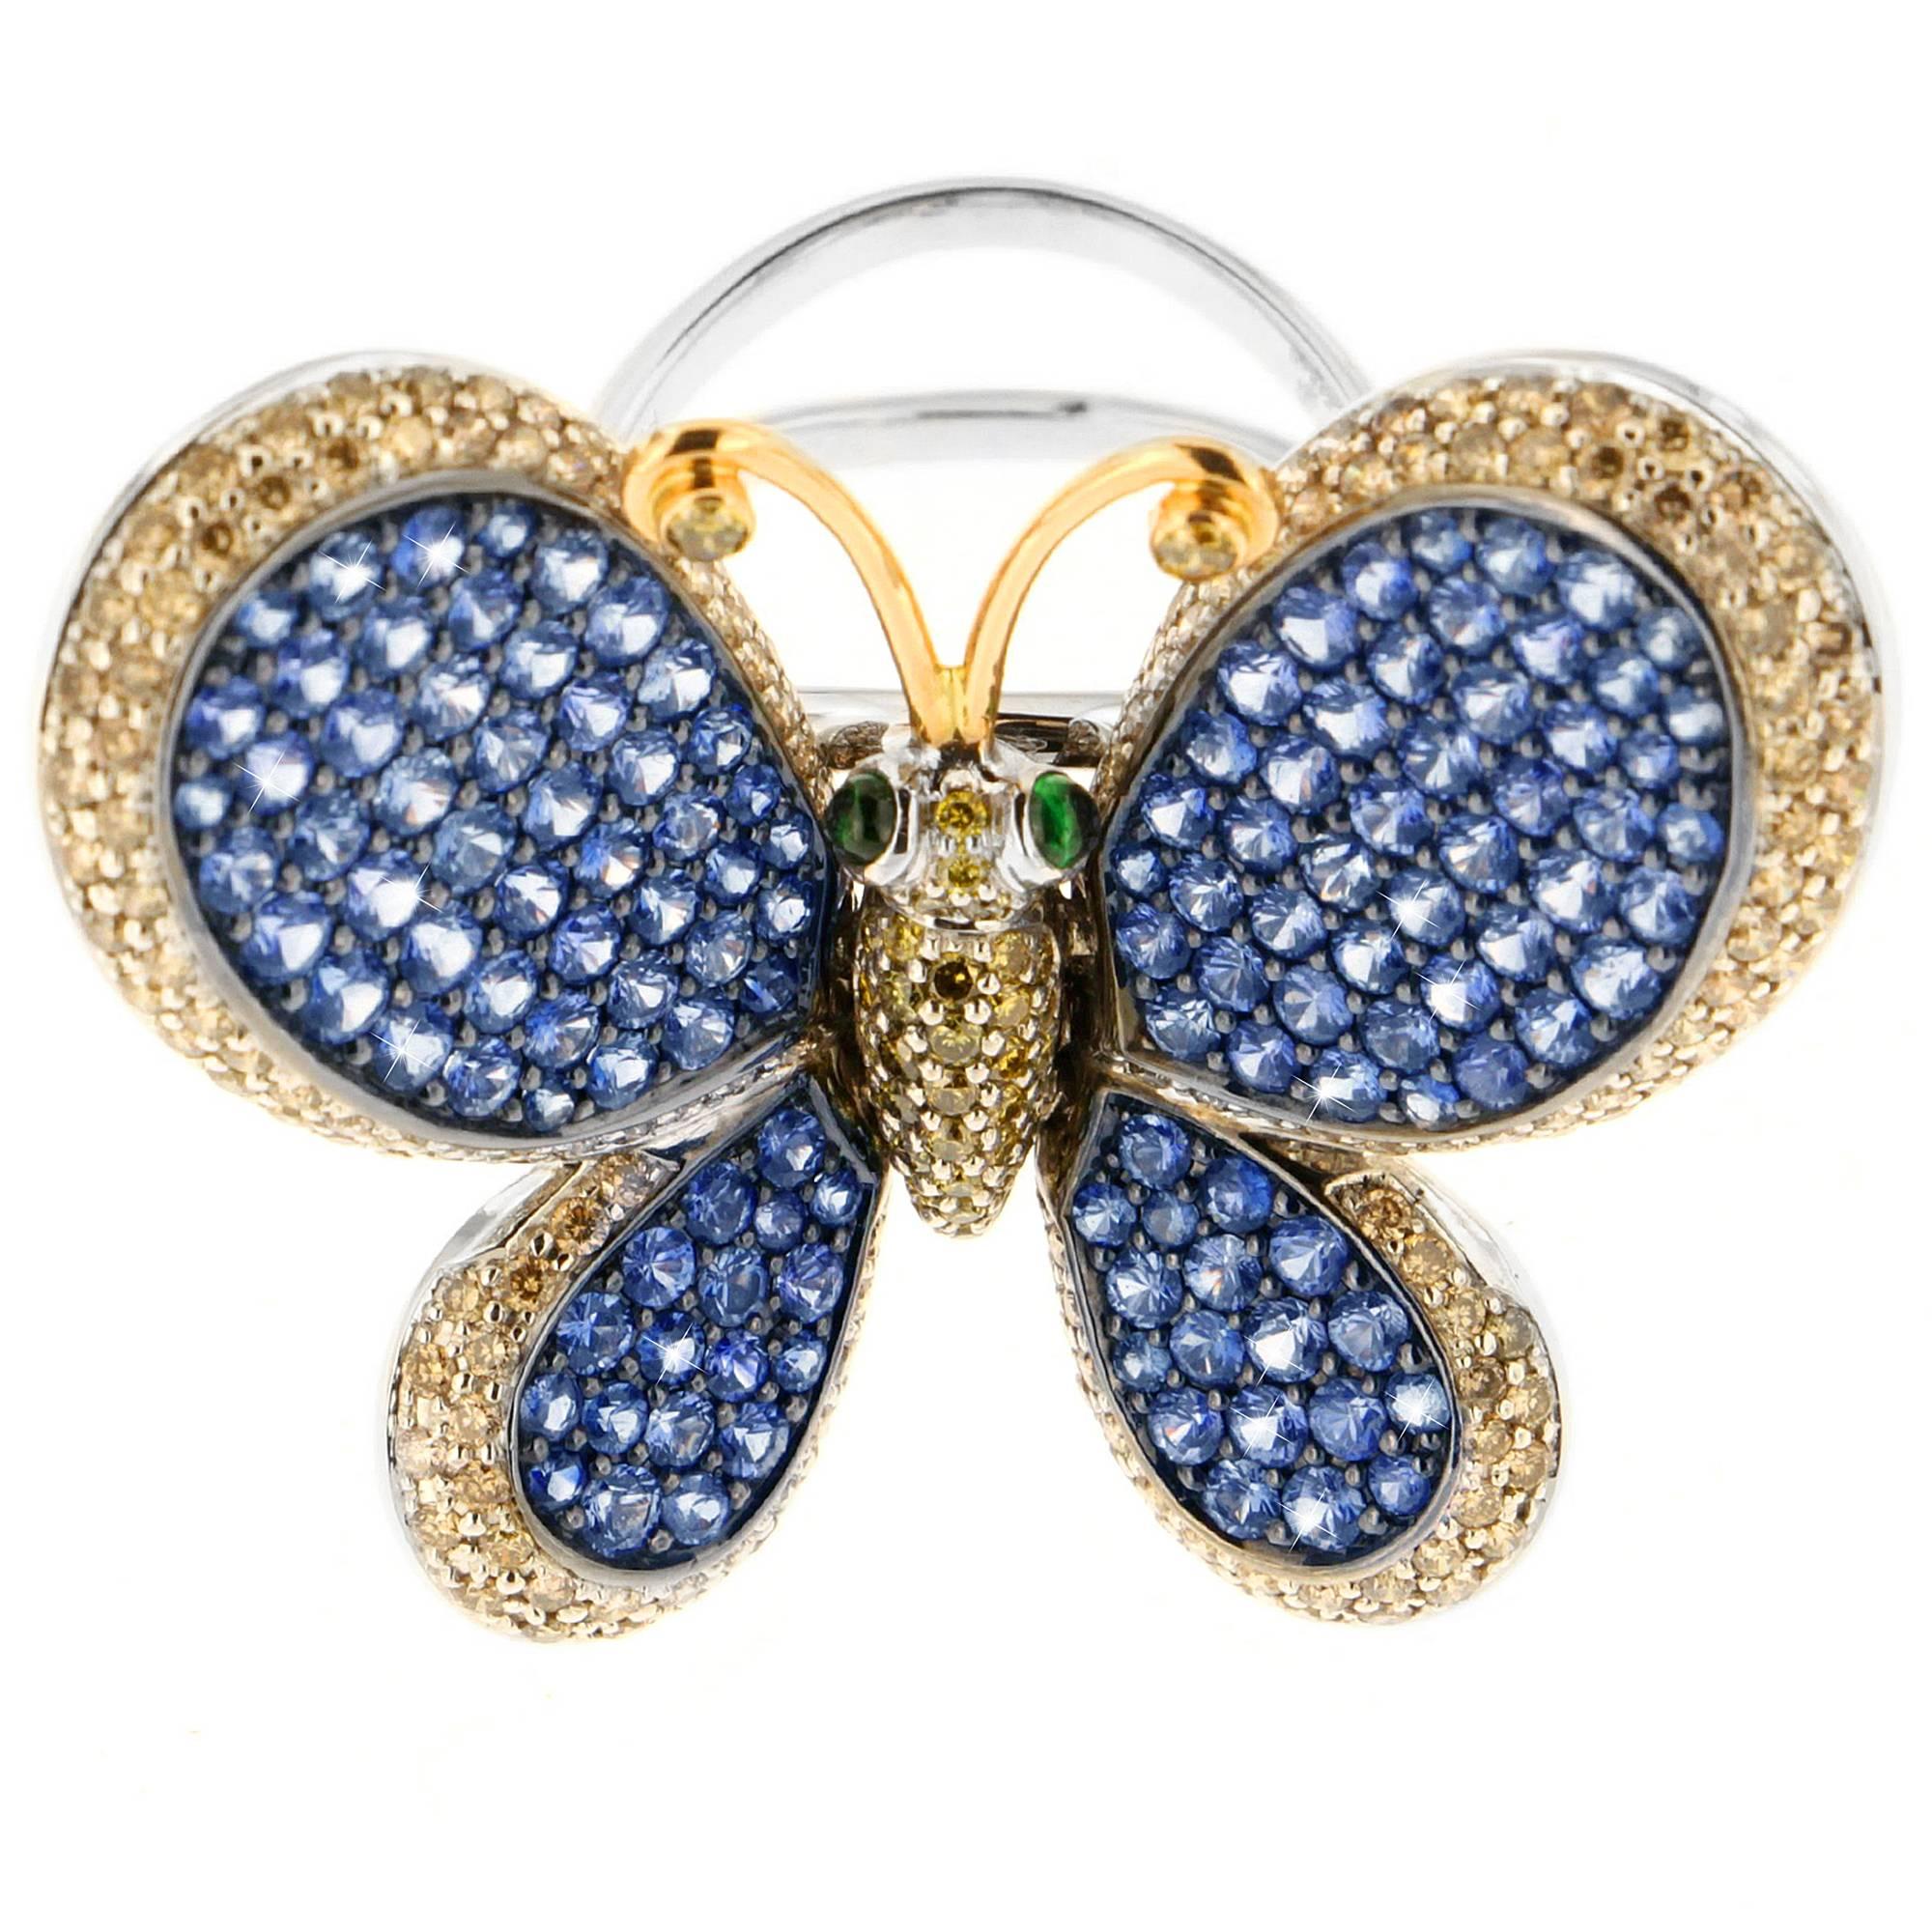 Show off your sense of style and whimsy with Zorab's playful butterfly cocktail ring meticulously hand-crafted with 4.56 Carat of Blue Sapphire, 1.74 Carats of treated Brown Diamonds, 0.40 Carats of Yellow Diamonds and 0.20 Carats of Tsavorite